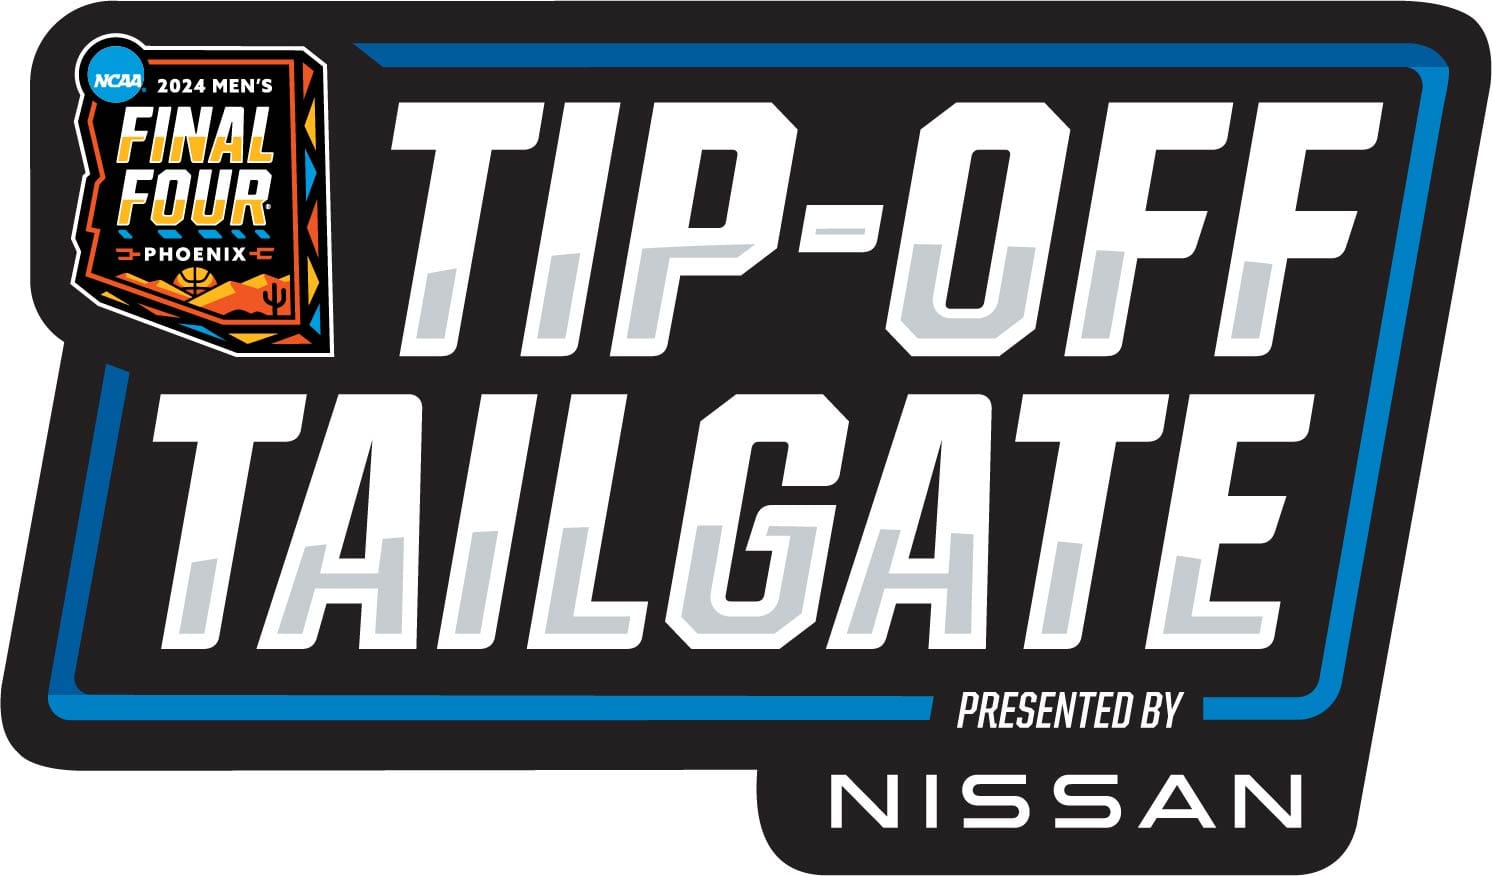 Men's Final Four Tip-Off Tailgate® Presented by Nissan